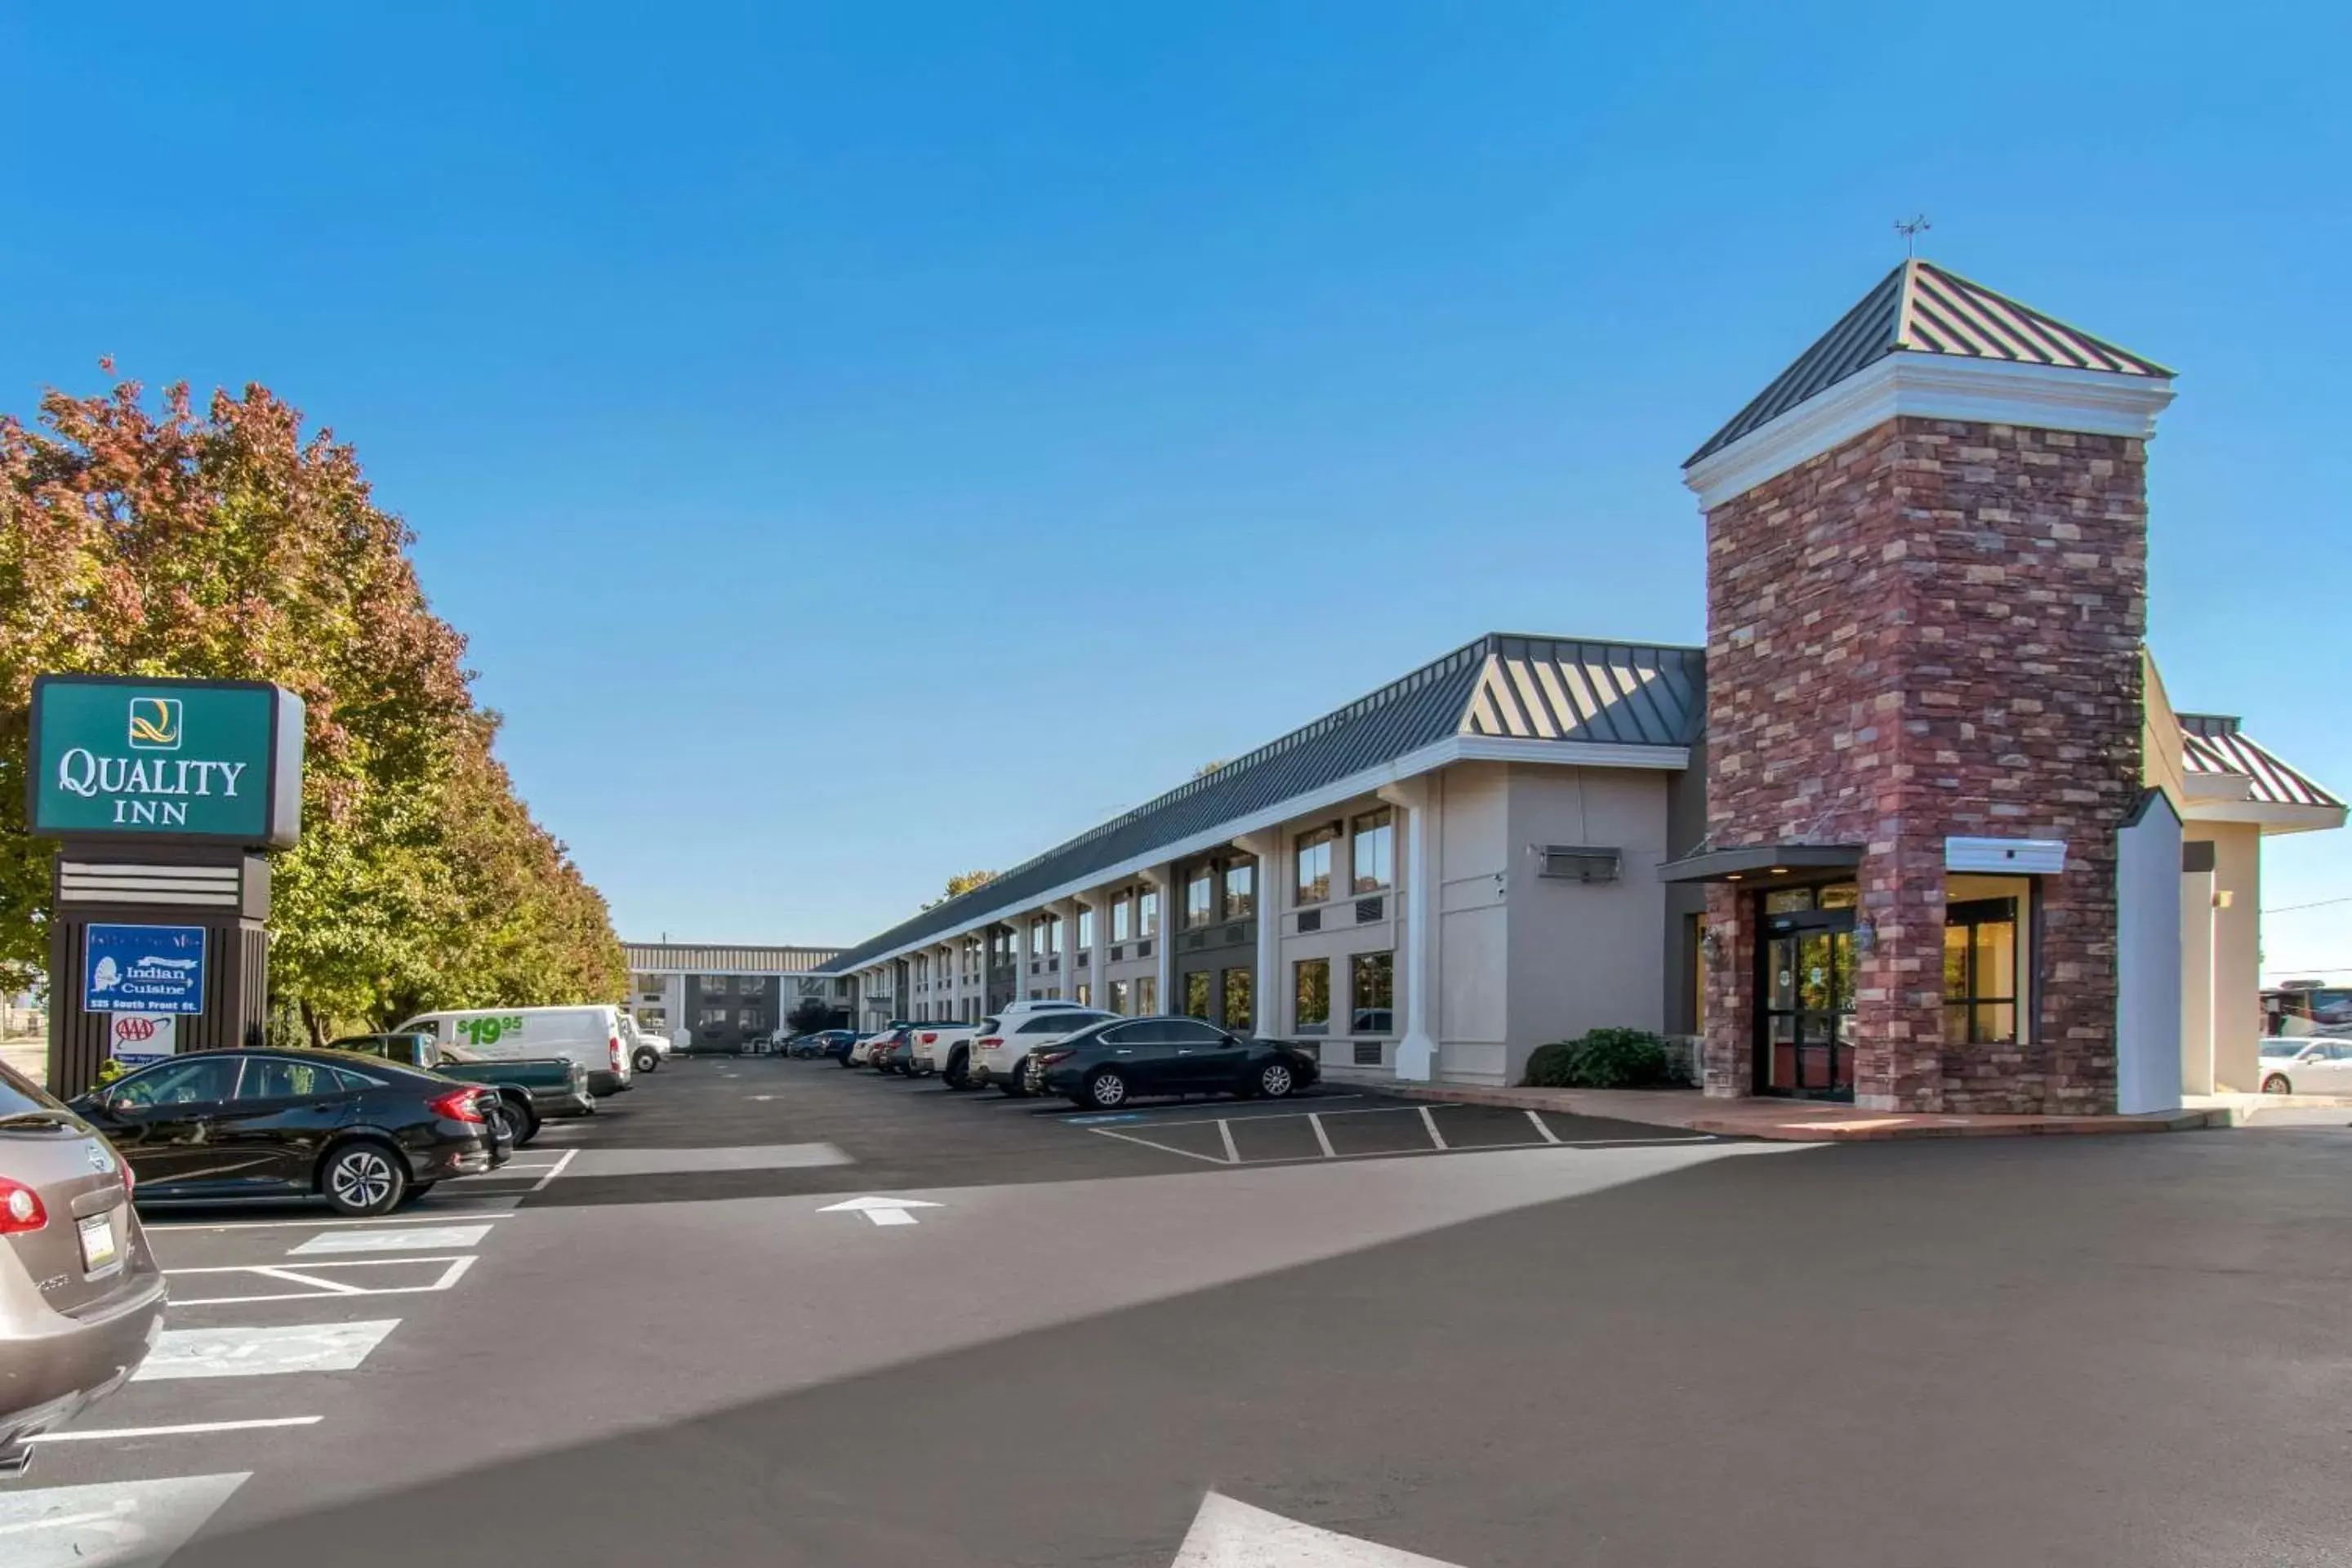 Property building in Quality Inn Riverfront Harrisburg